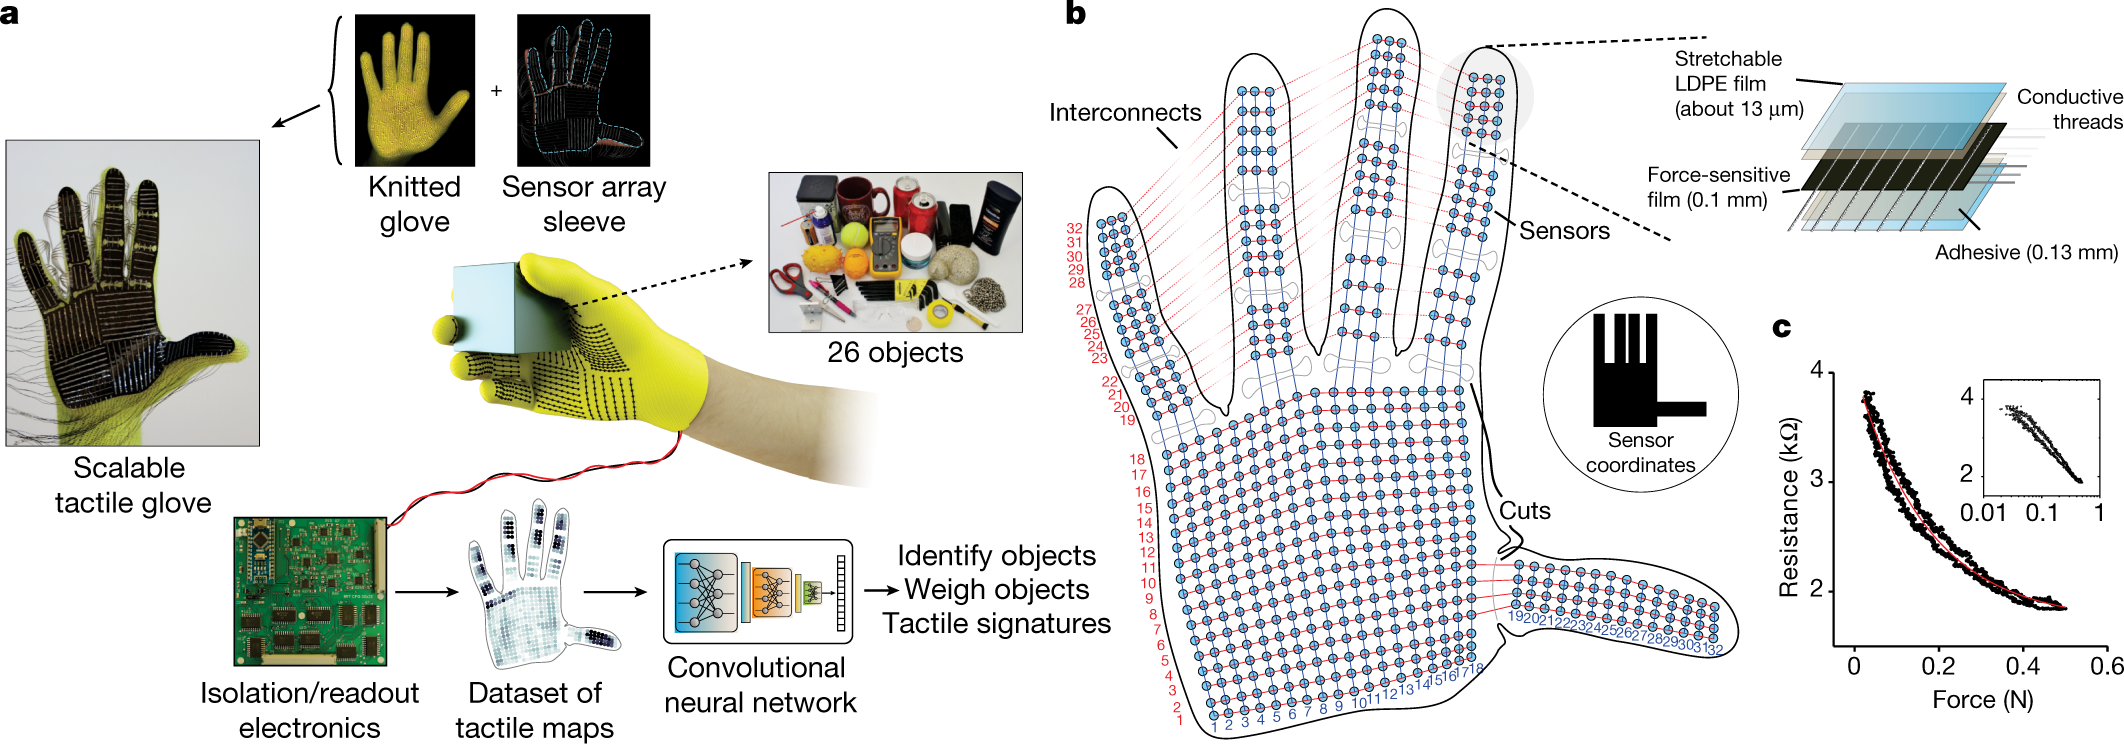 Learning the signatures of the human grasp using a scalable tactile glove |  Nature